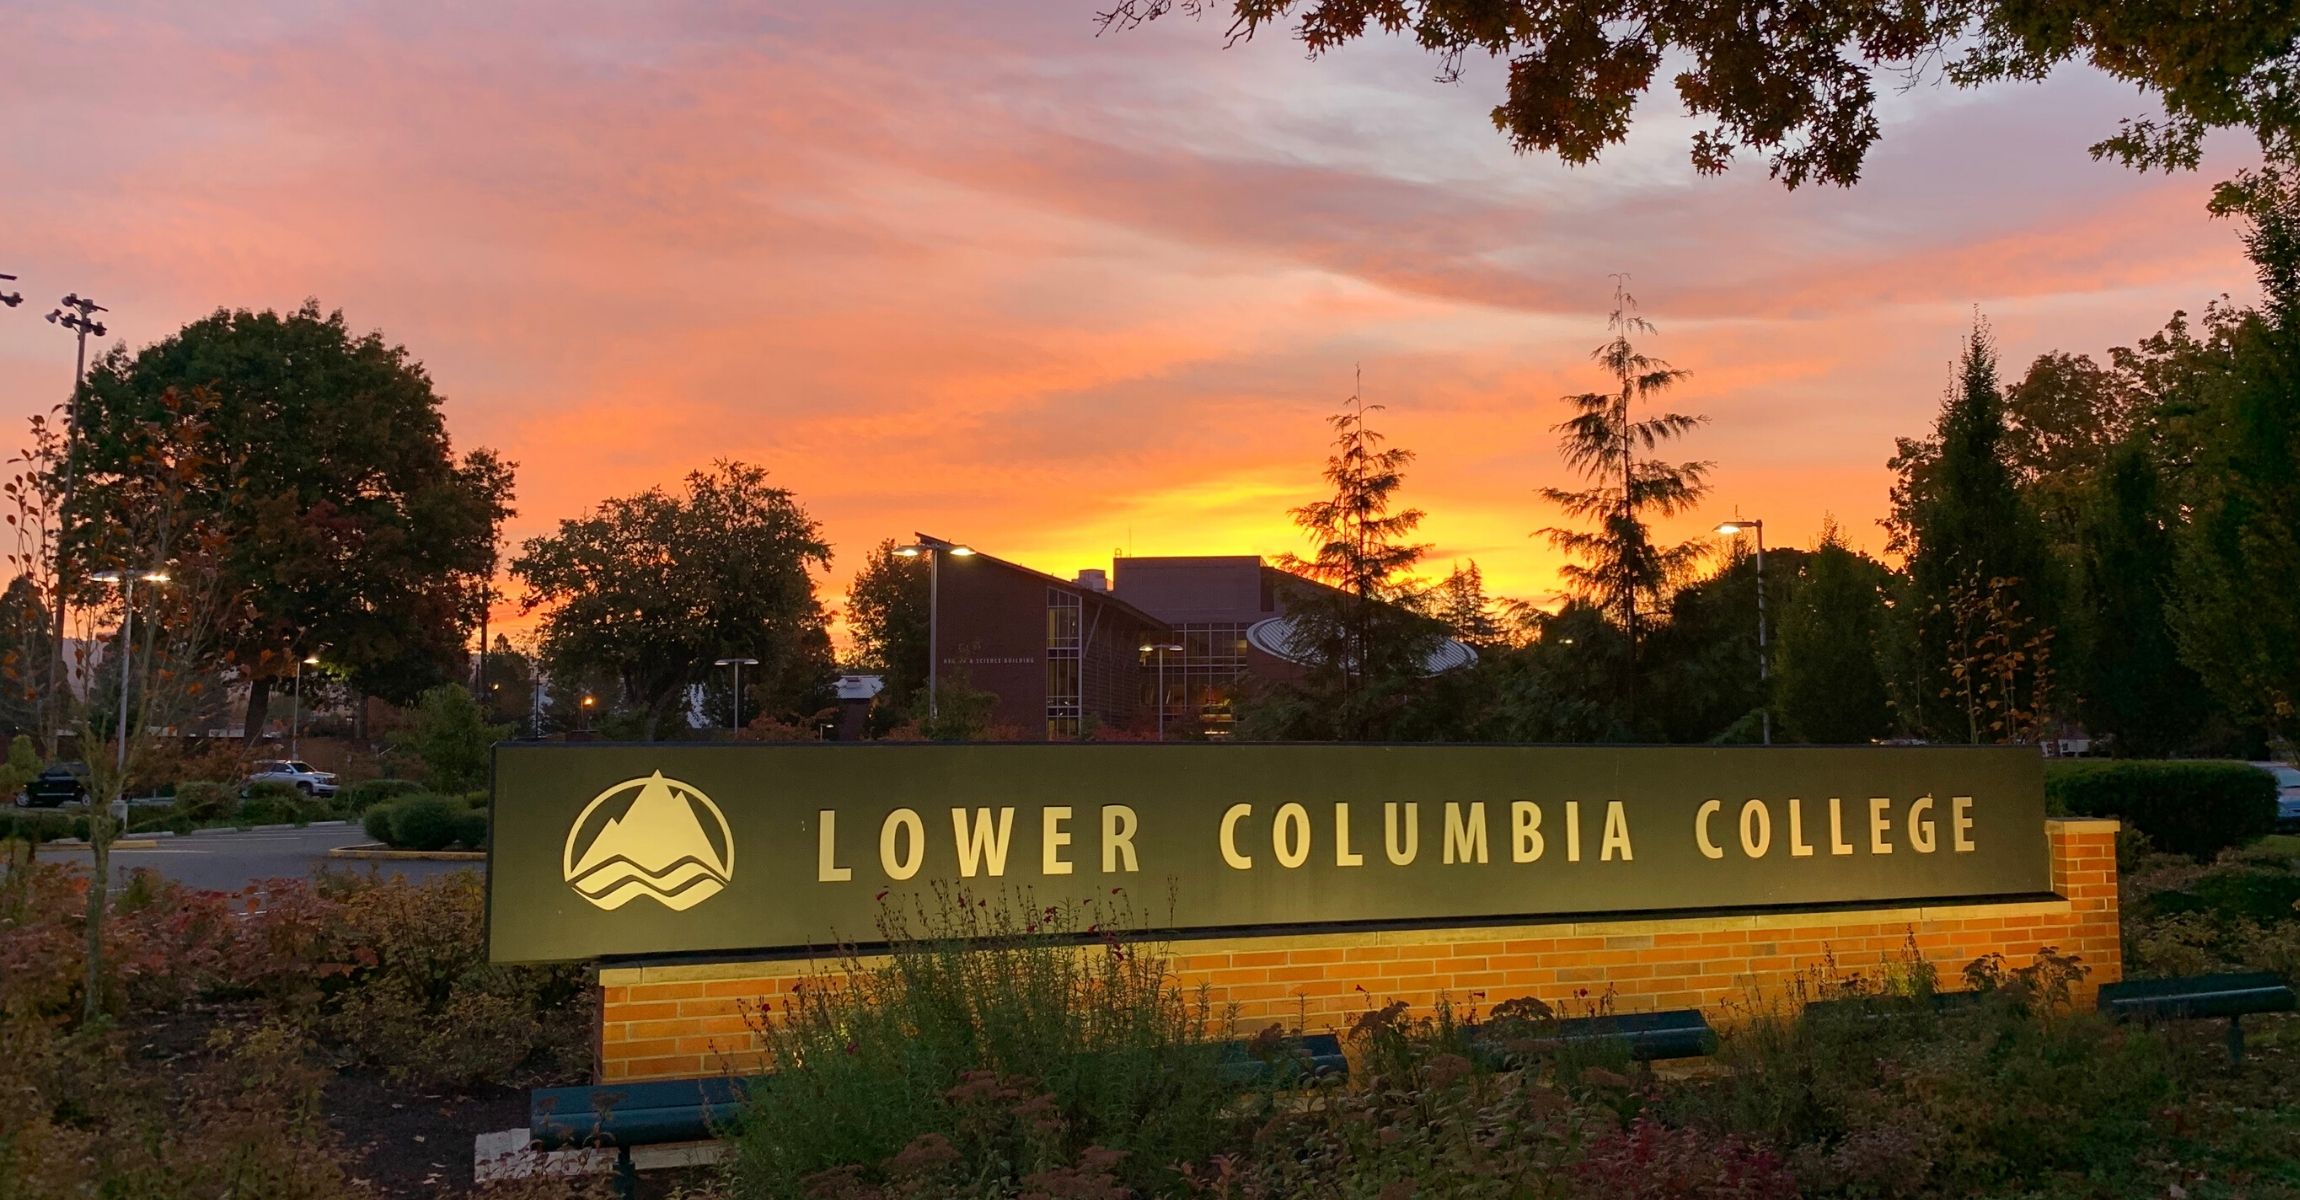 A photo of the Lower Columbia College sign on campus at night with lighting from below the sign.